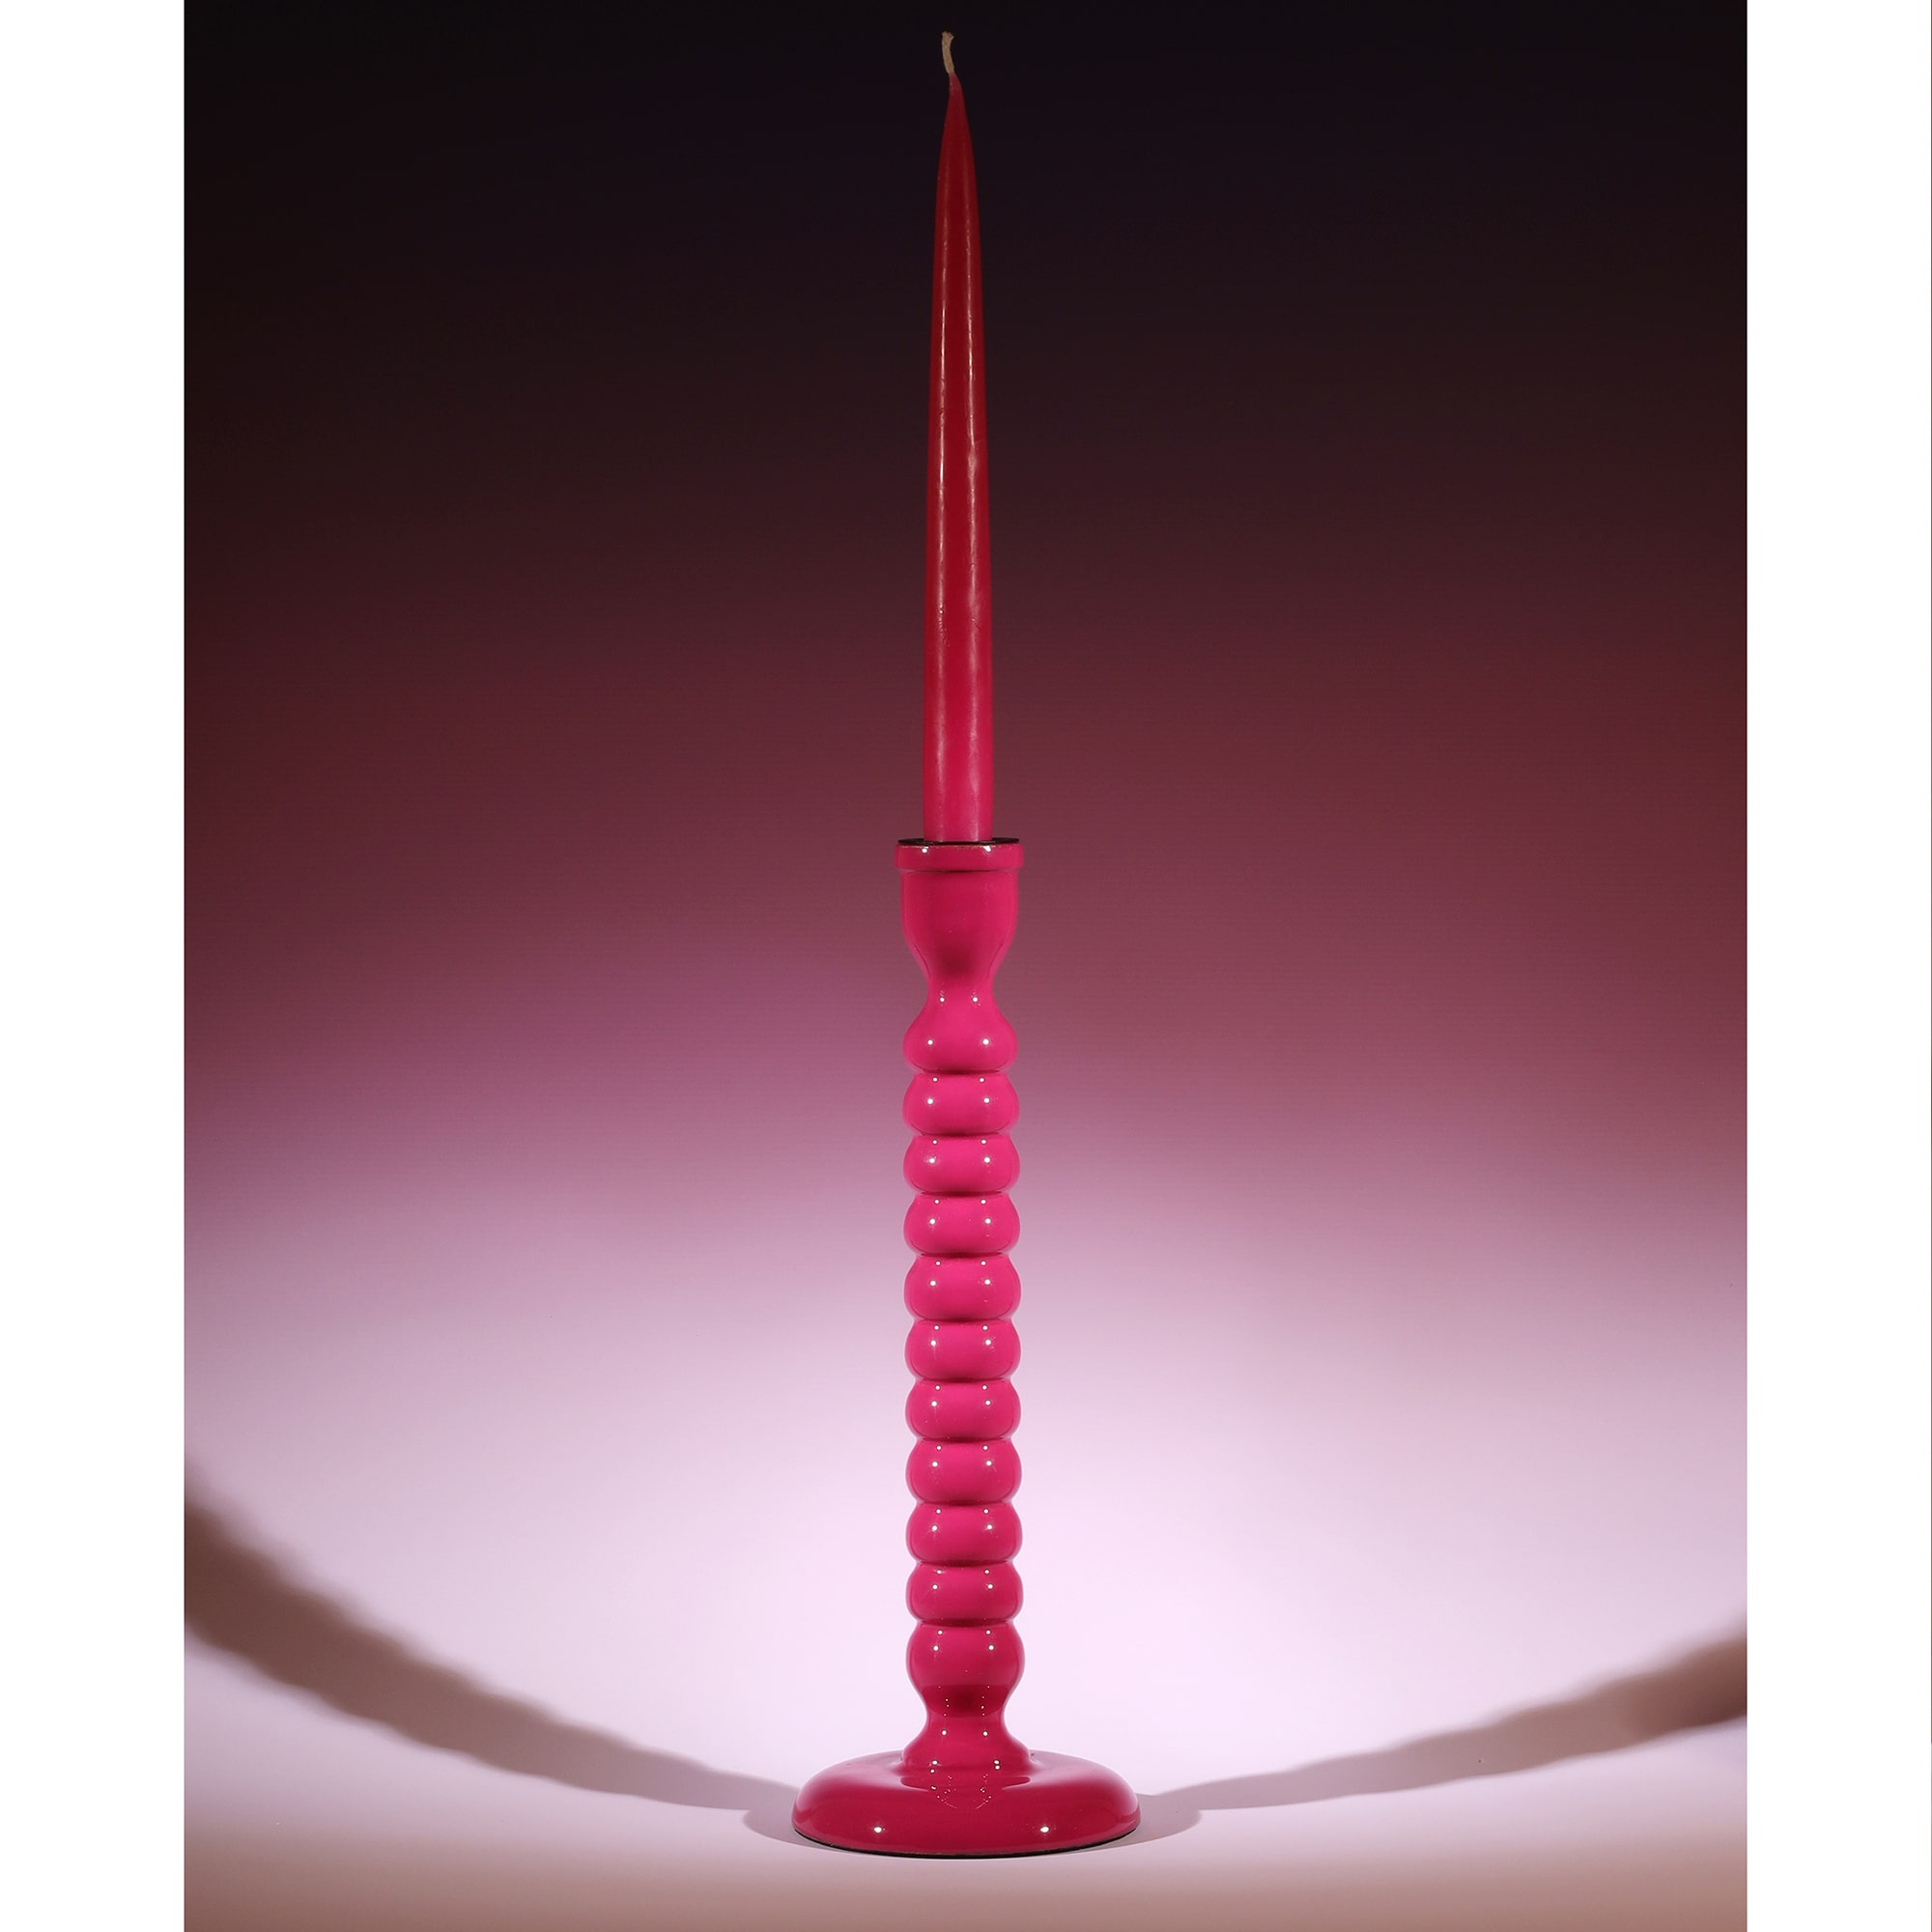 Fuschia Polished Lacquer Drift Candle holder with a matching candle